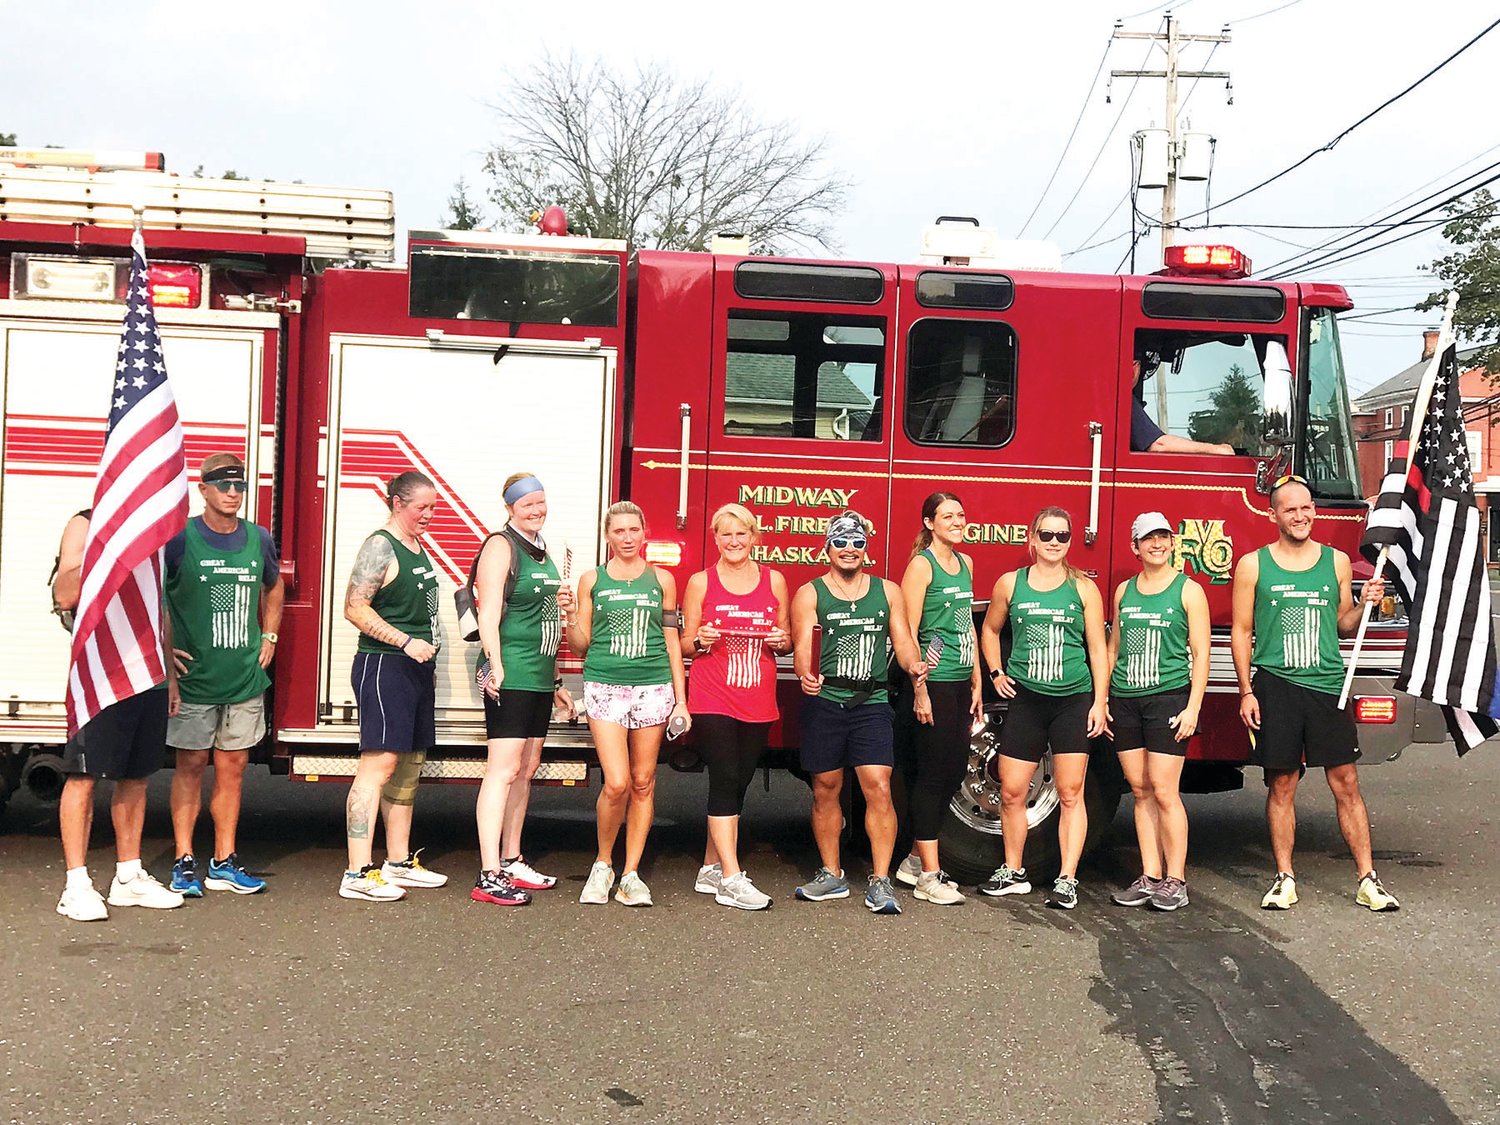 Runners taking part in The Great American Relay stopped on Route 202 in Lahaska to take photographs with members of the Midway Fire Company on Tuesday.